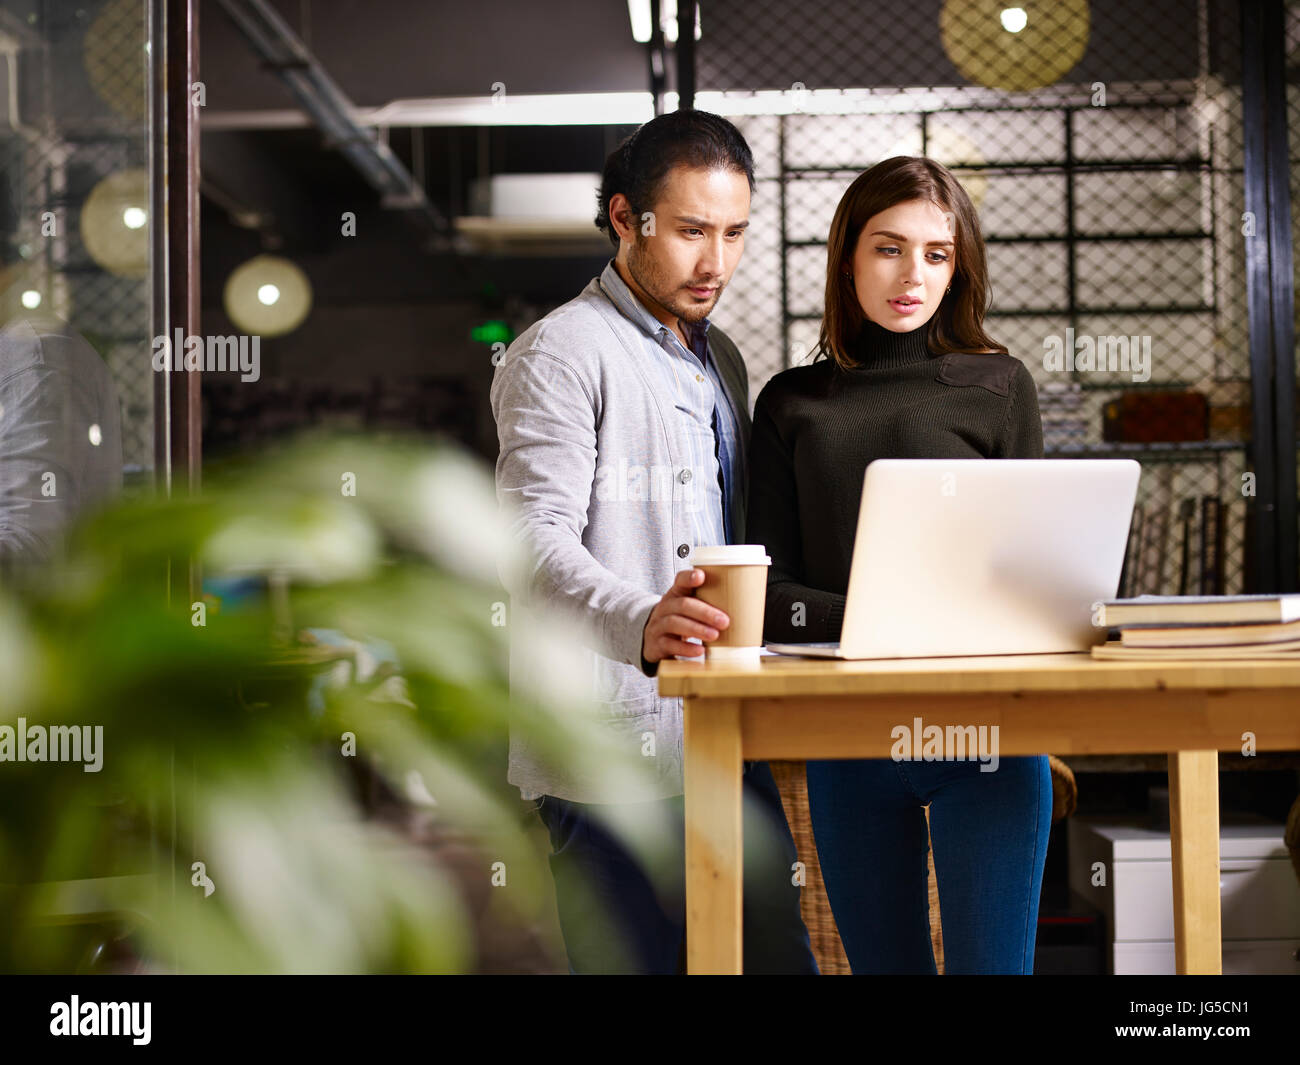 asian and caucasian employee in small private company working together using laptop computer. Stock Photo